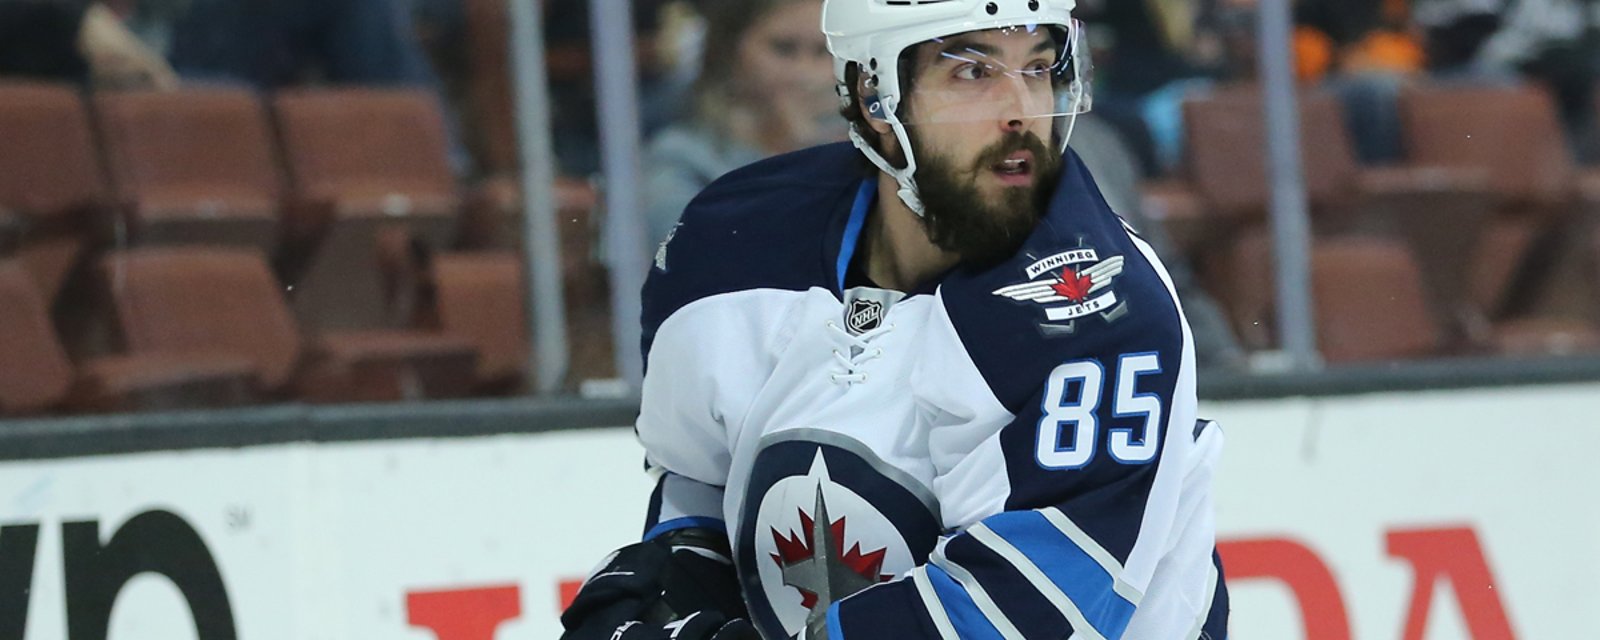 Breaking: Perreault placed on IR; recall top prospect